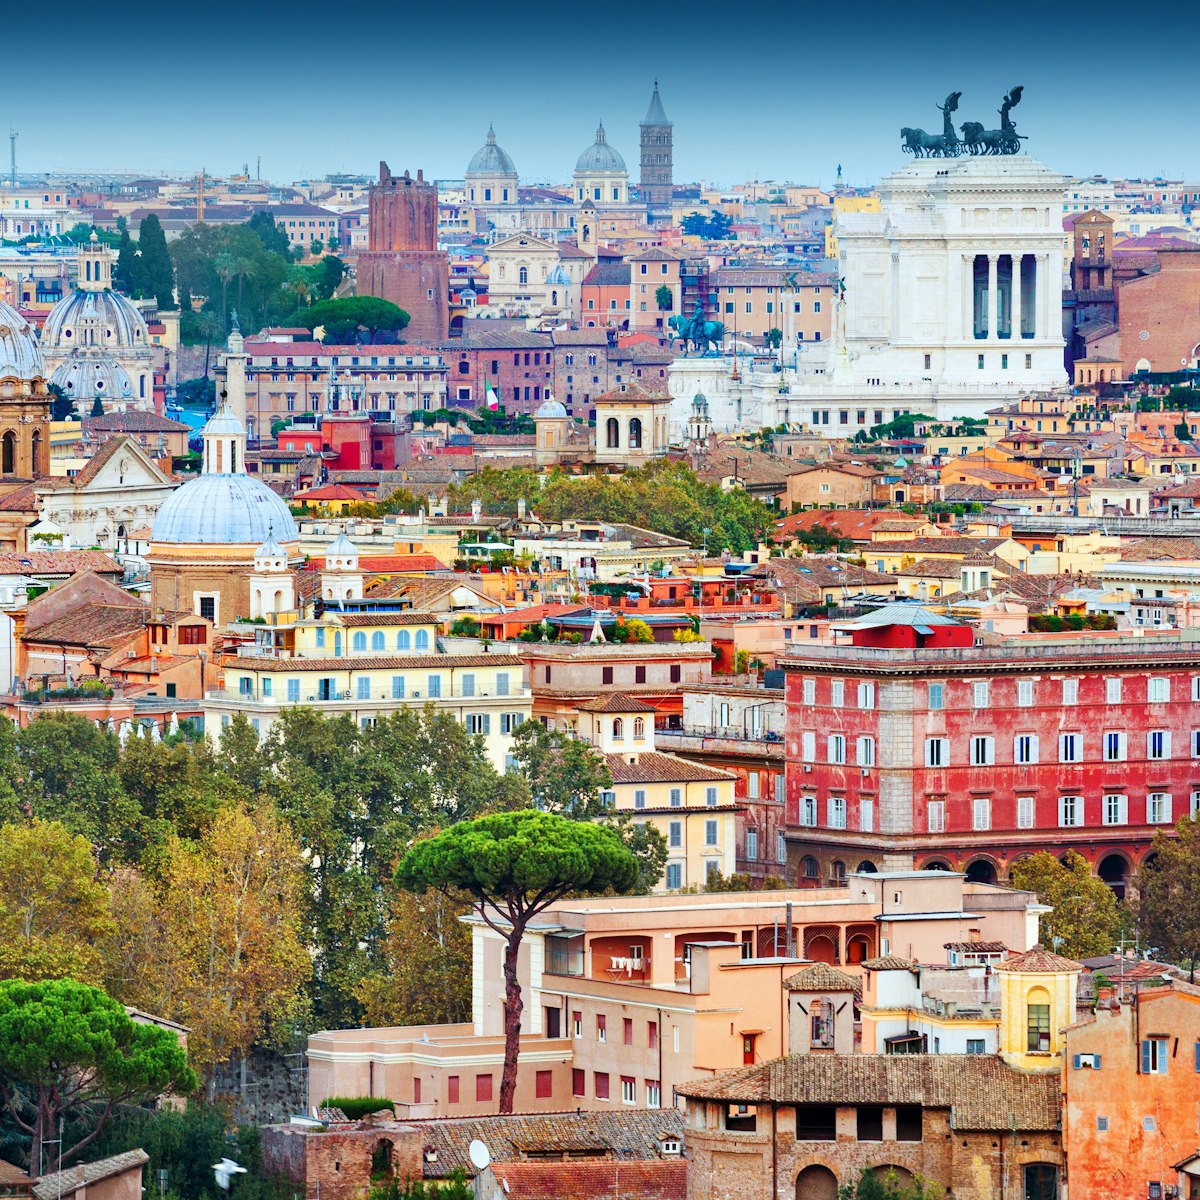 Panoramic view of downtown Rome from the Gianicolo hill, Italy, Europe